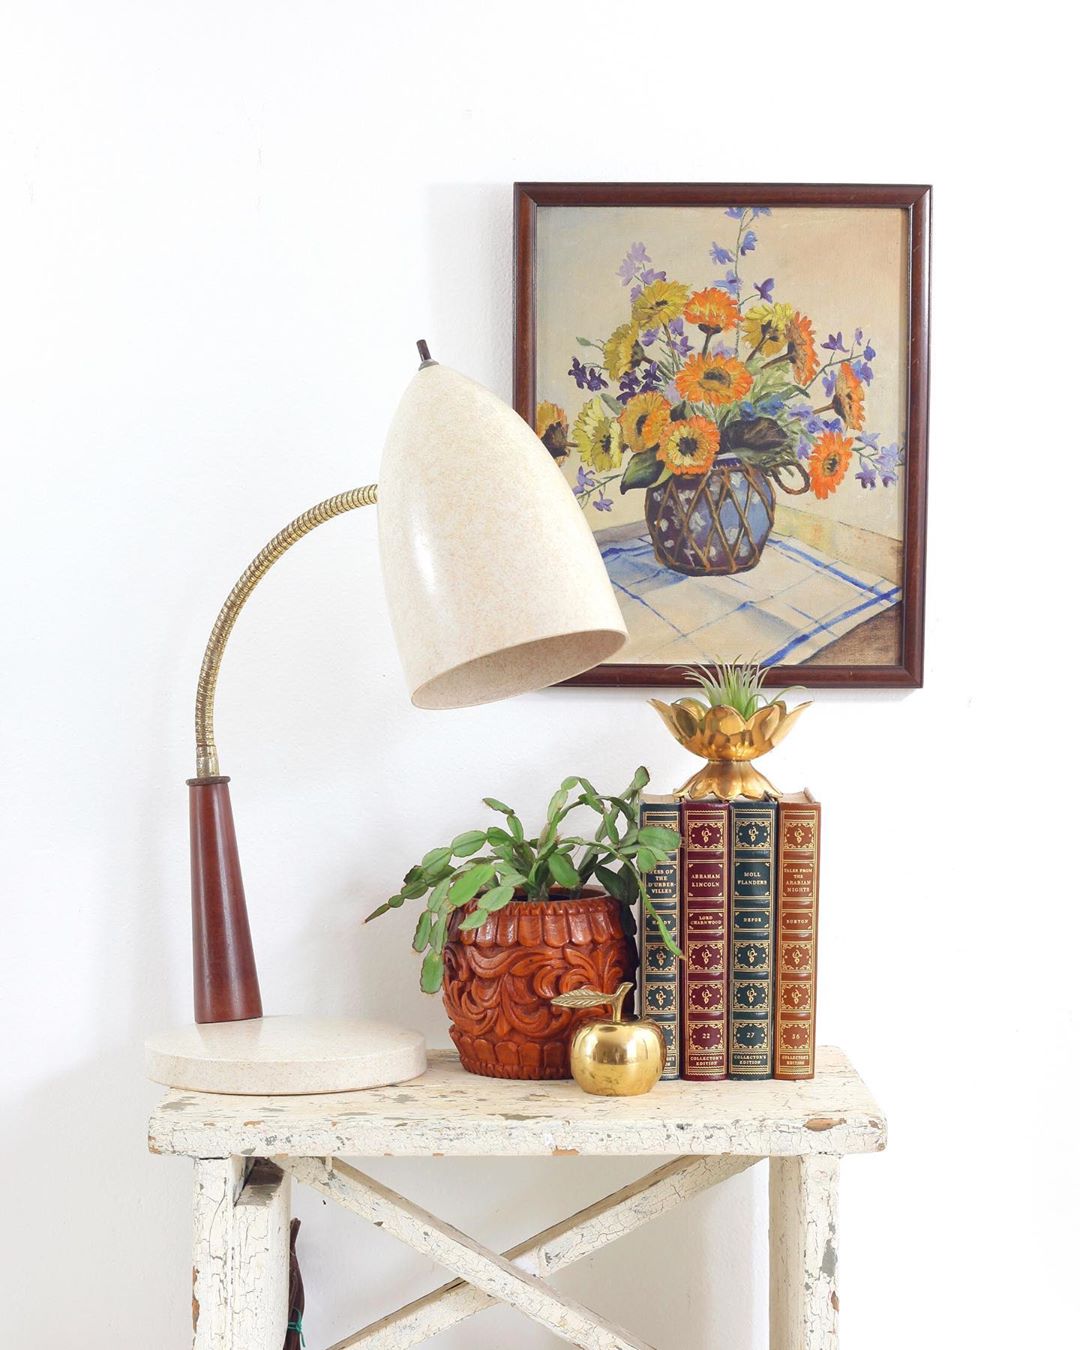 White vintage table with books and lamp on it. Photo by Instagram use @wiseapplevintage